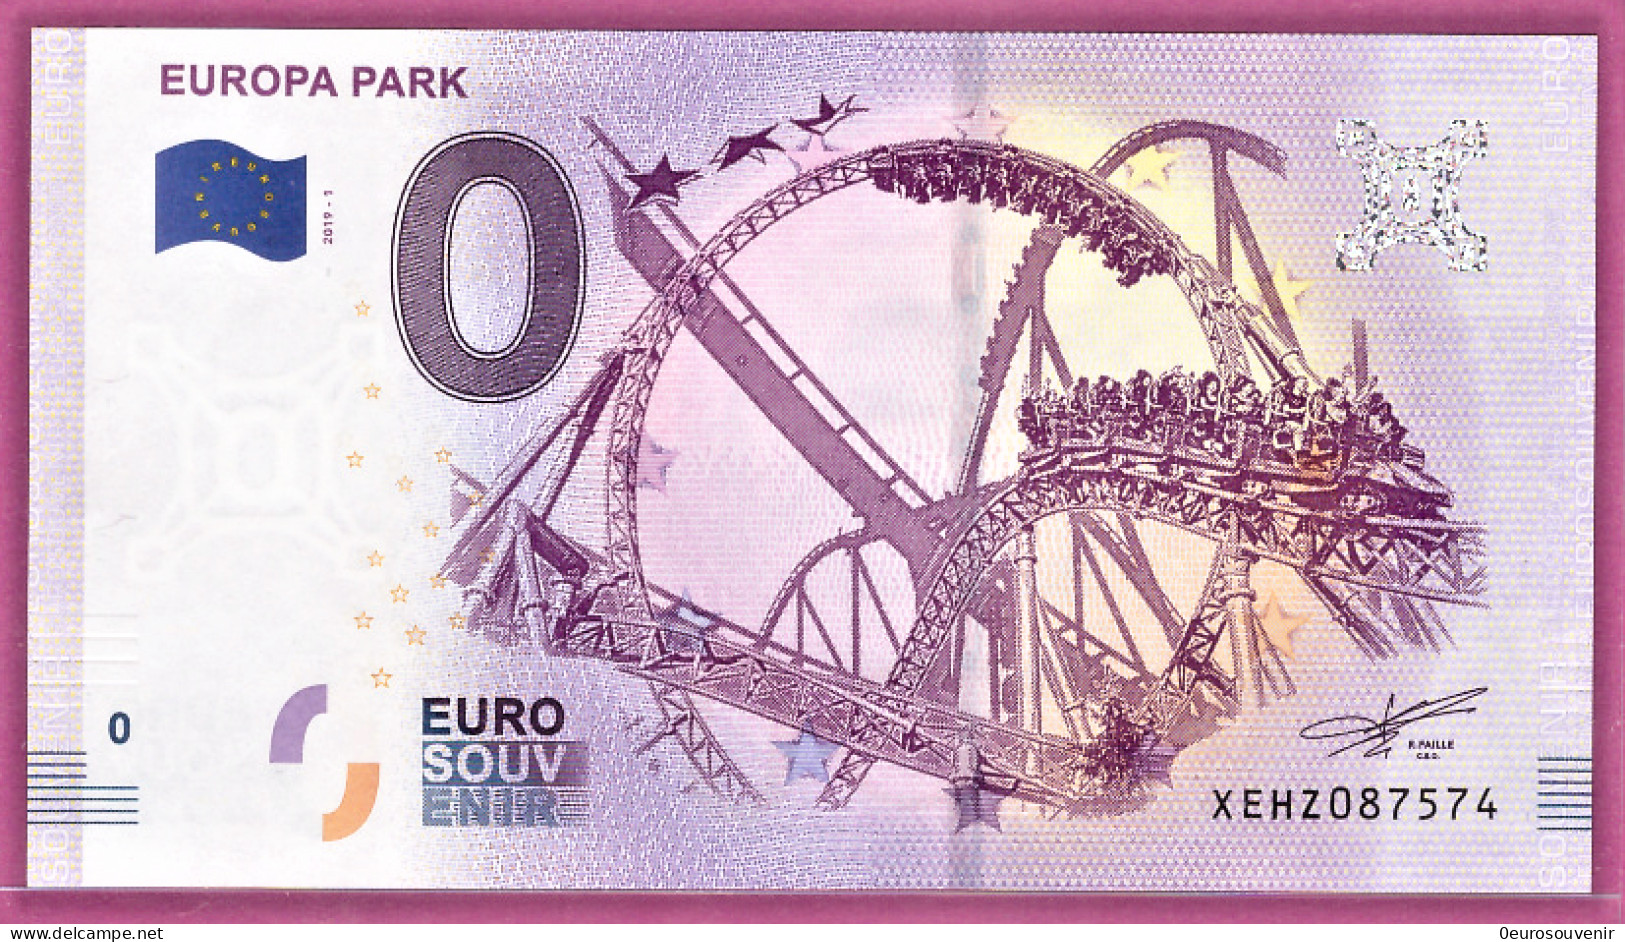 0-Euro XEHZ 2019-1 EUROPA PARK - Private Proofs / Unofficial